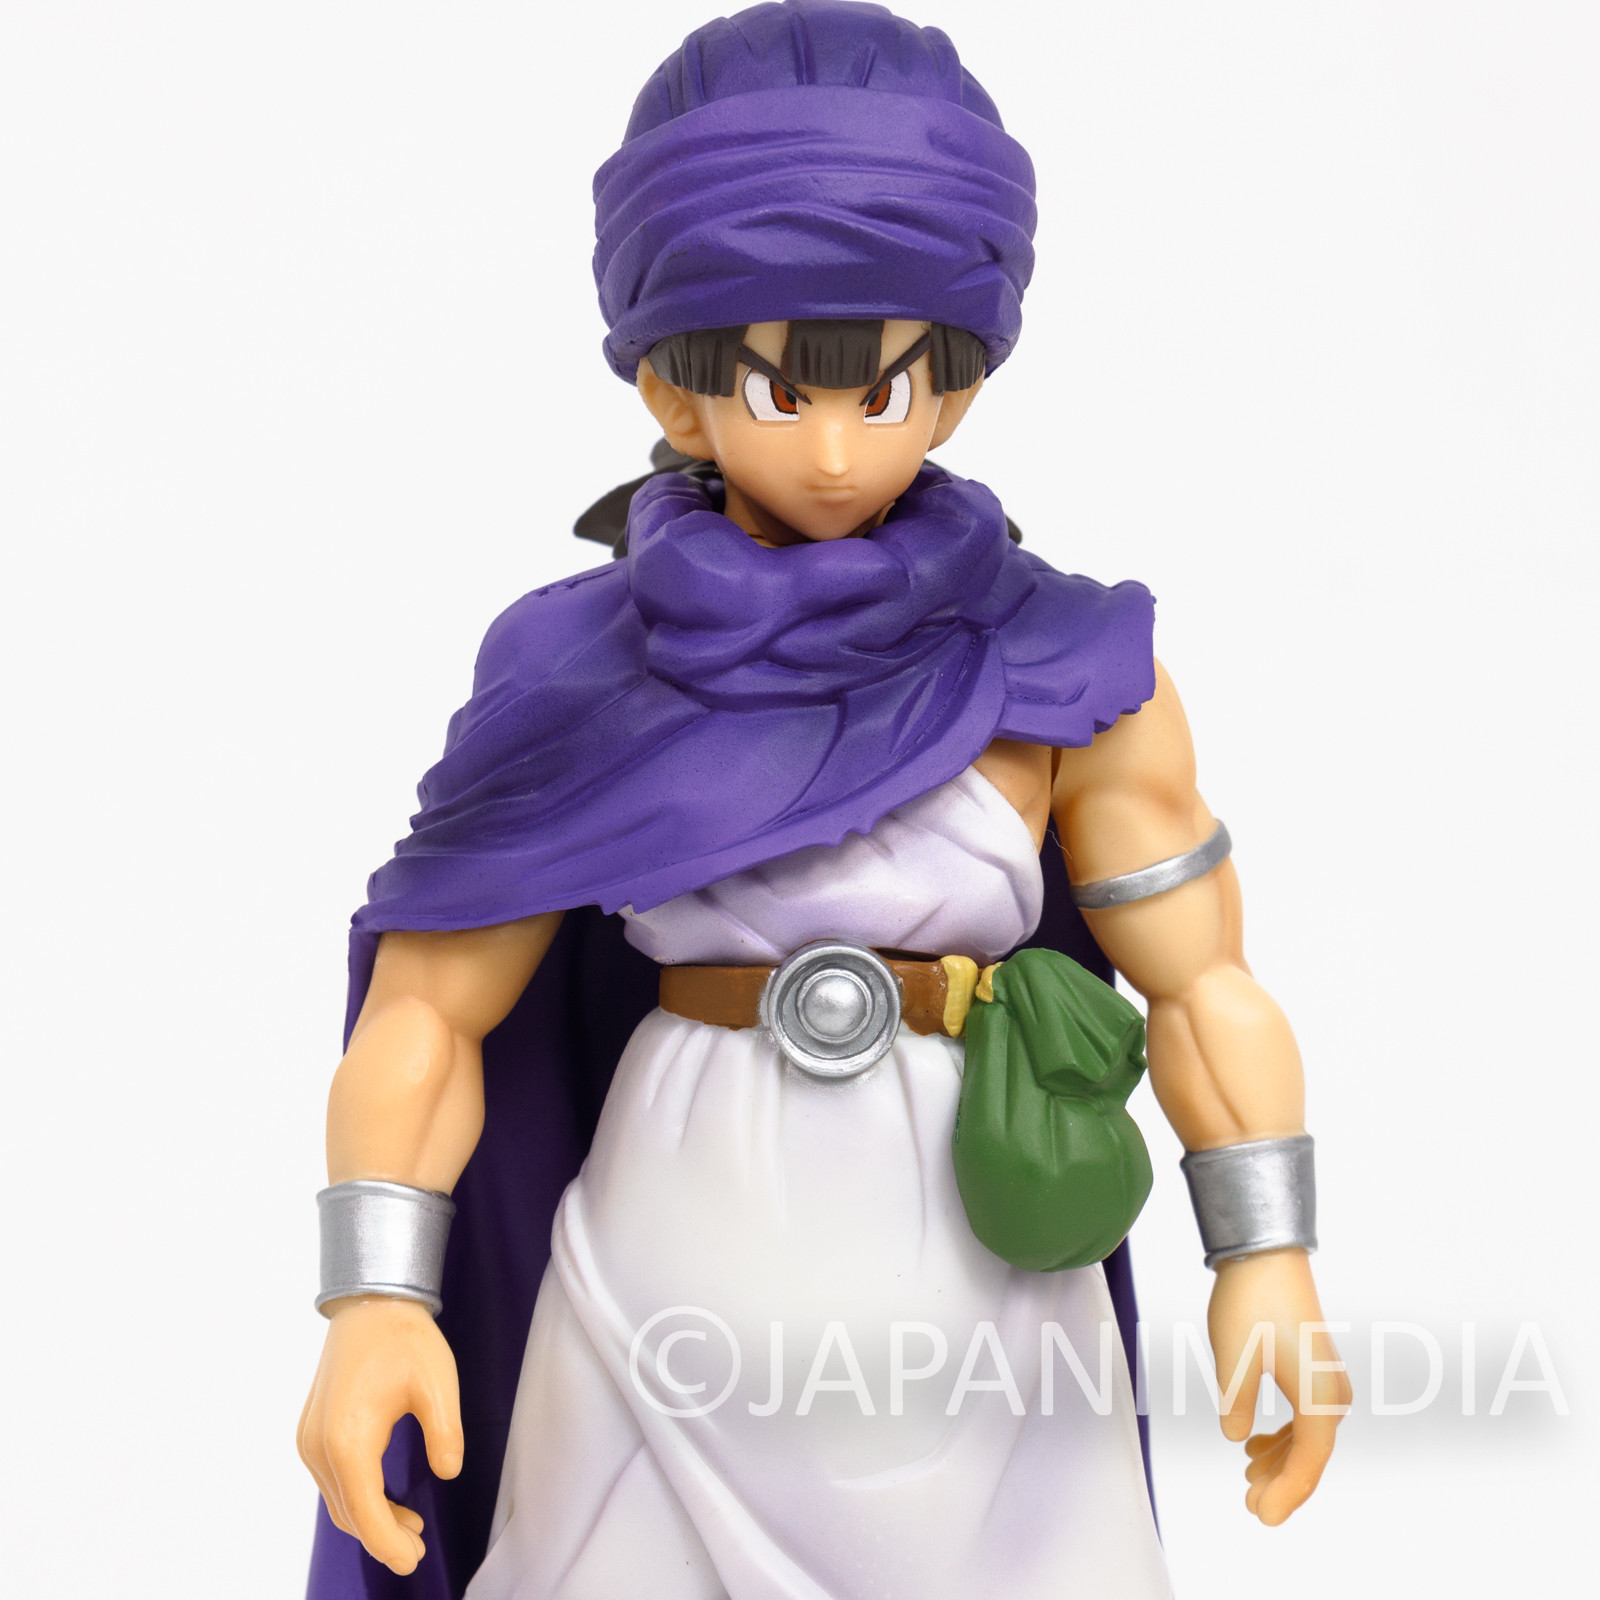 Square Enix Products Dragon Quest 25th Sofubi Character 005 Figure JAPAN ANIME